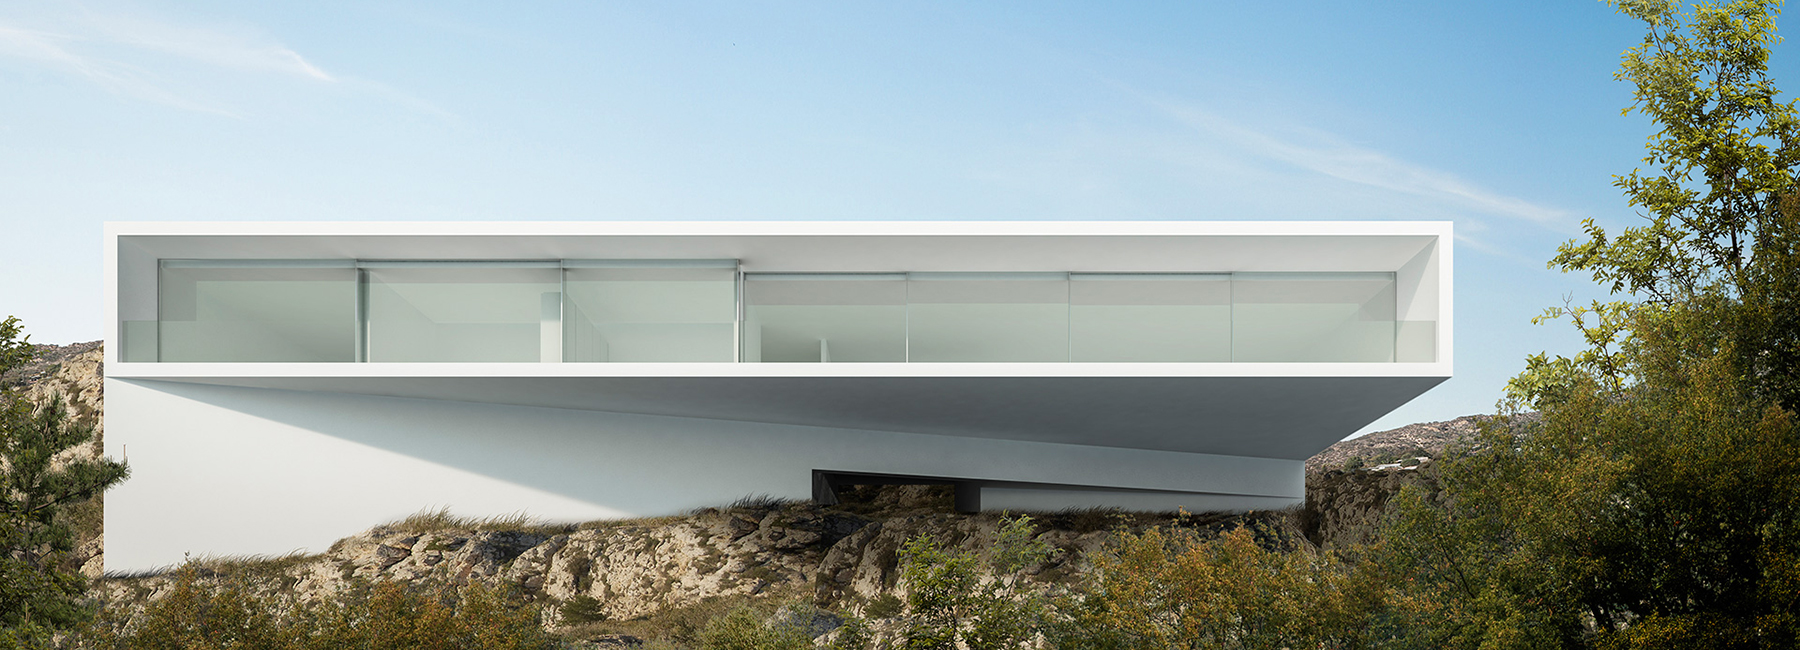 fran silvestre embeds house into hollywood hills in los angeles